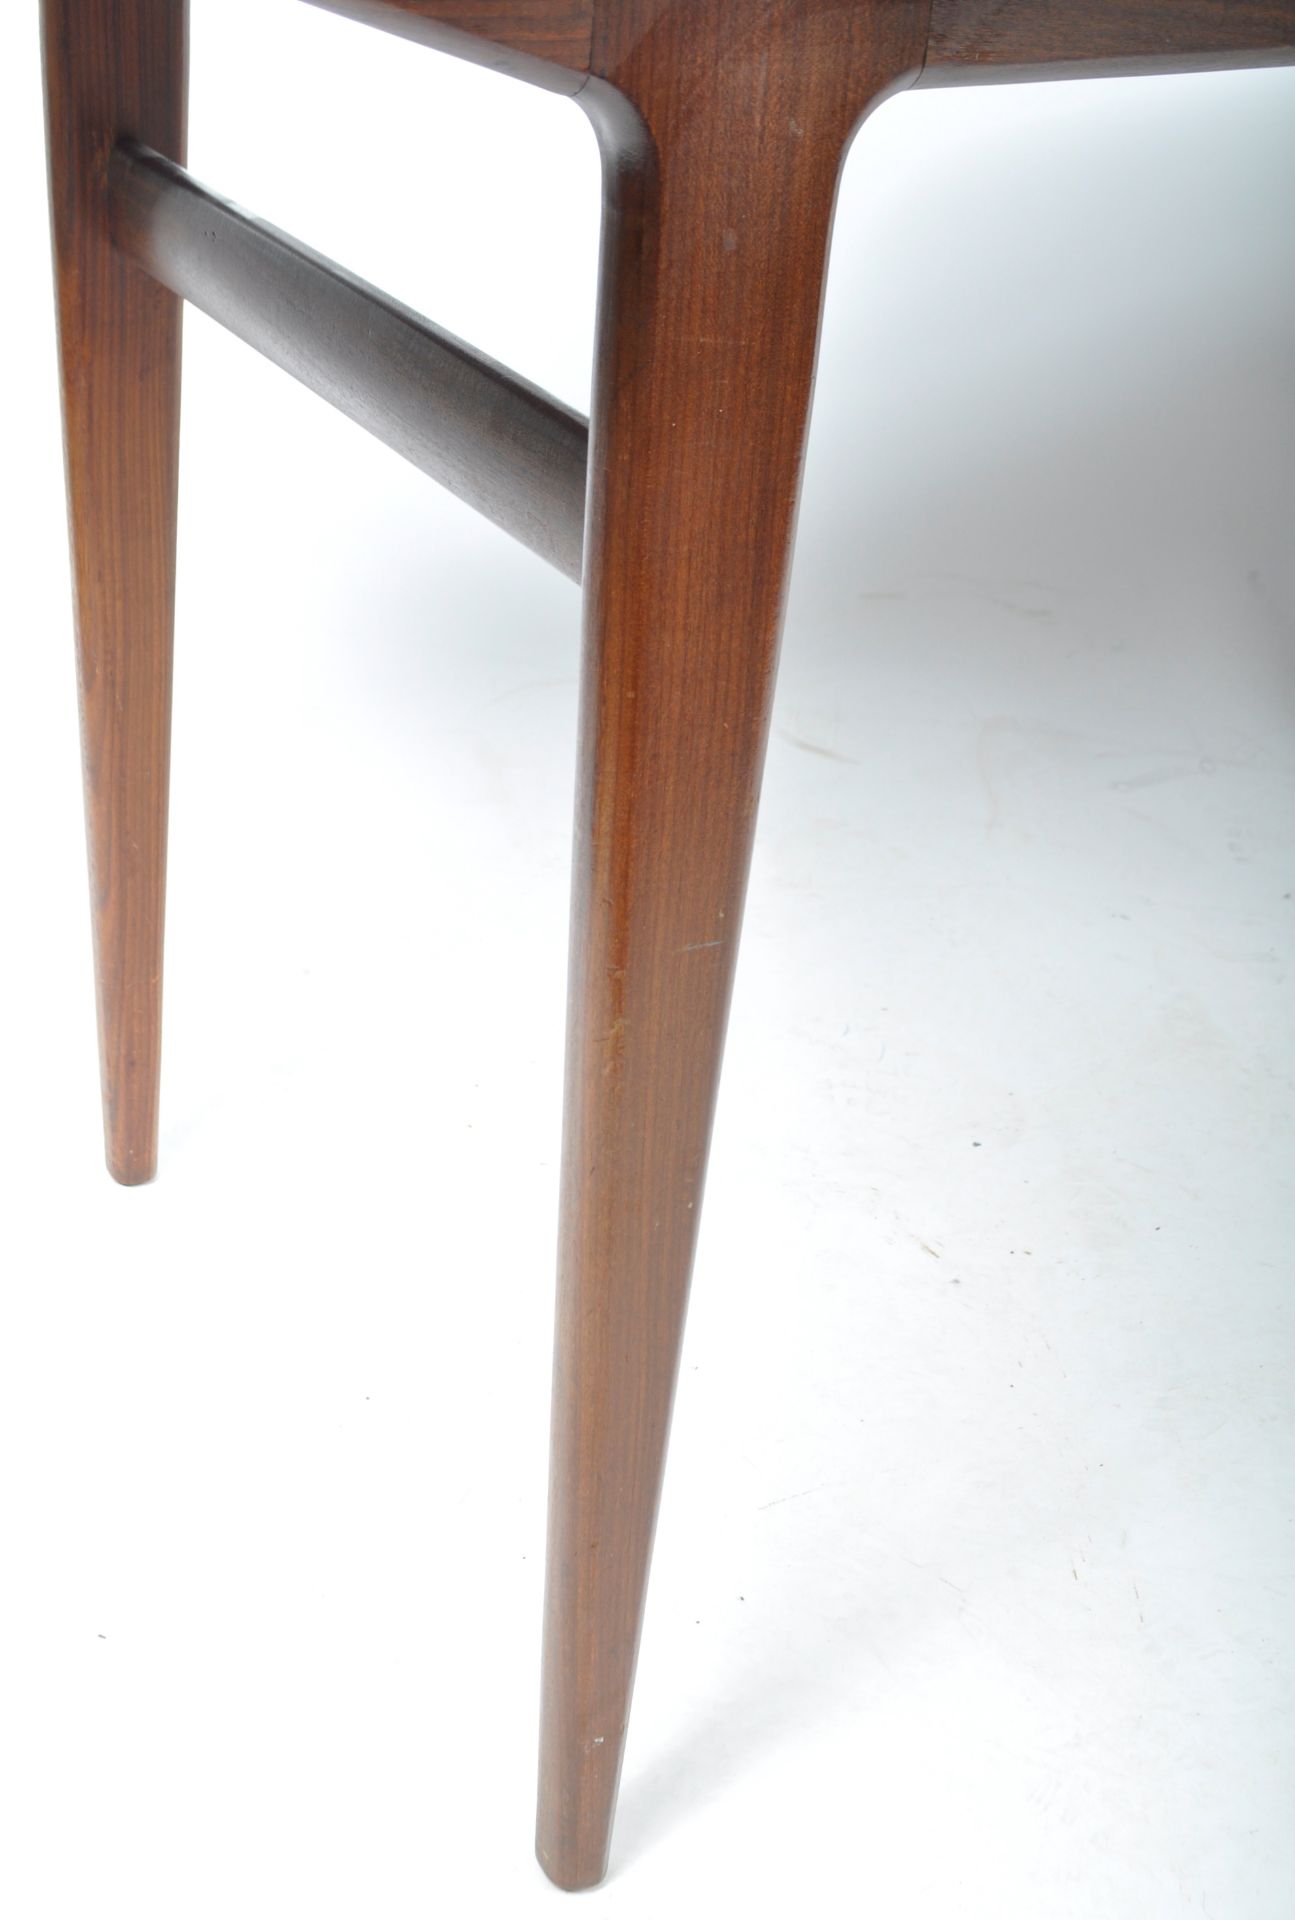 JOHN HERBERT FOR YOUNGERS MID CENTURY DINING TABLE - Image 4 of 4